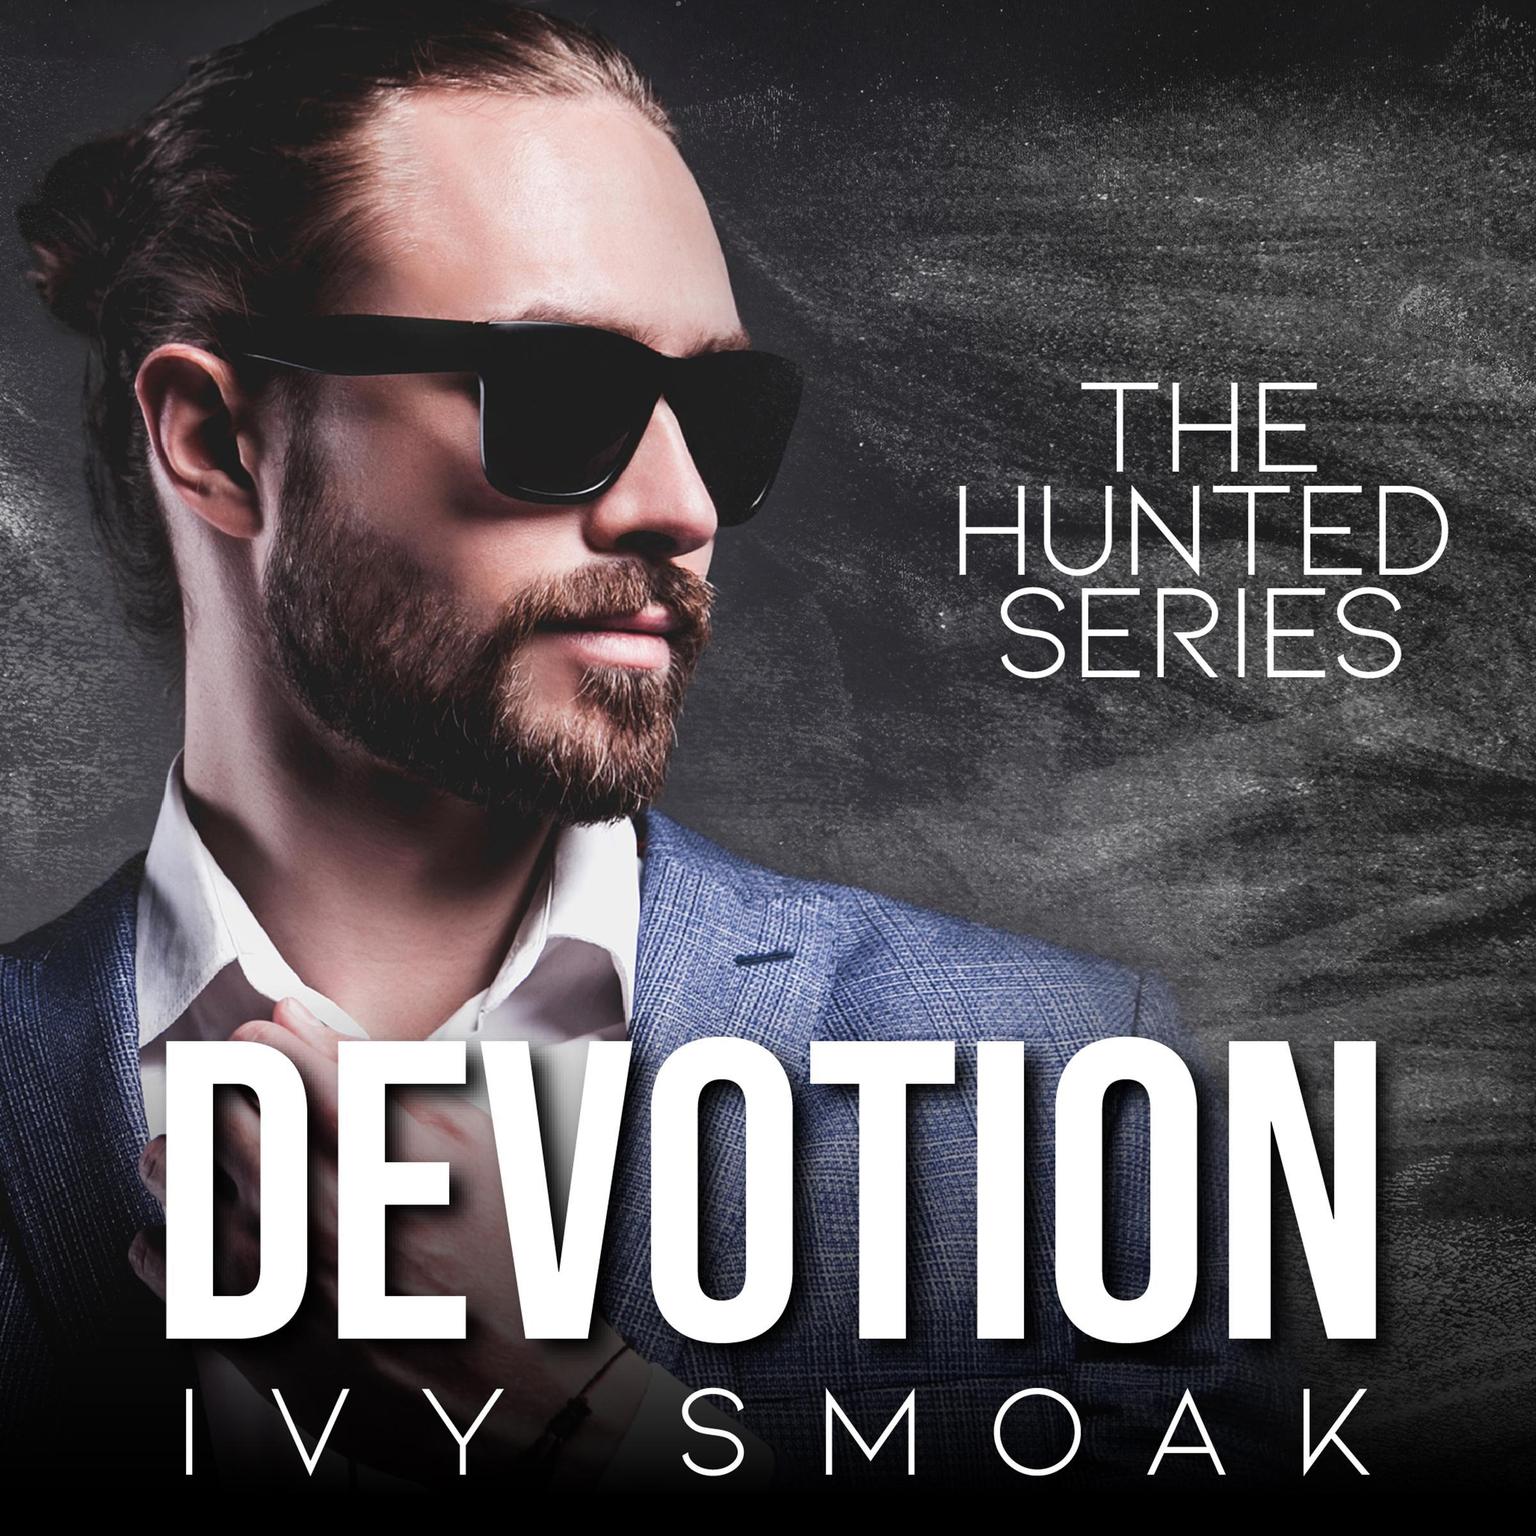 Devotion (The Hunted Series Book 4) Audiobook, by Ivy Smoak